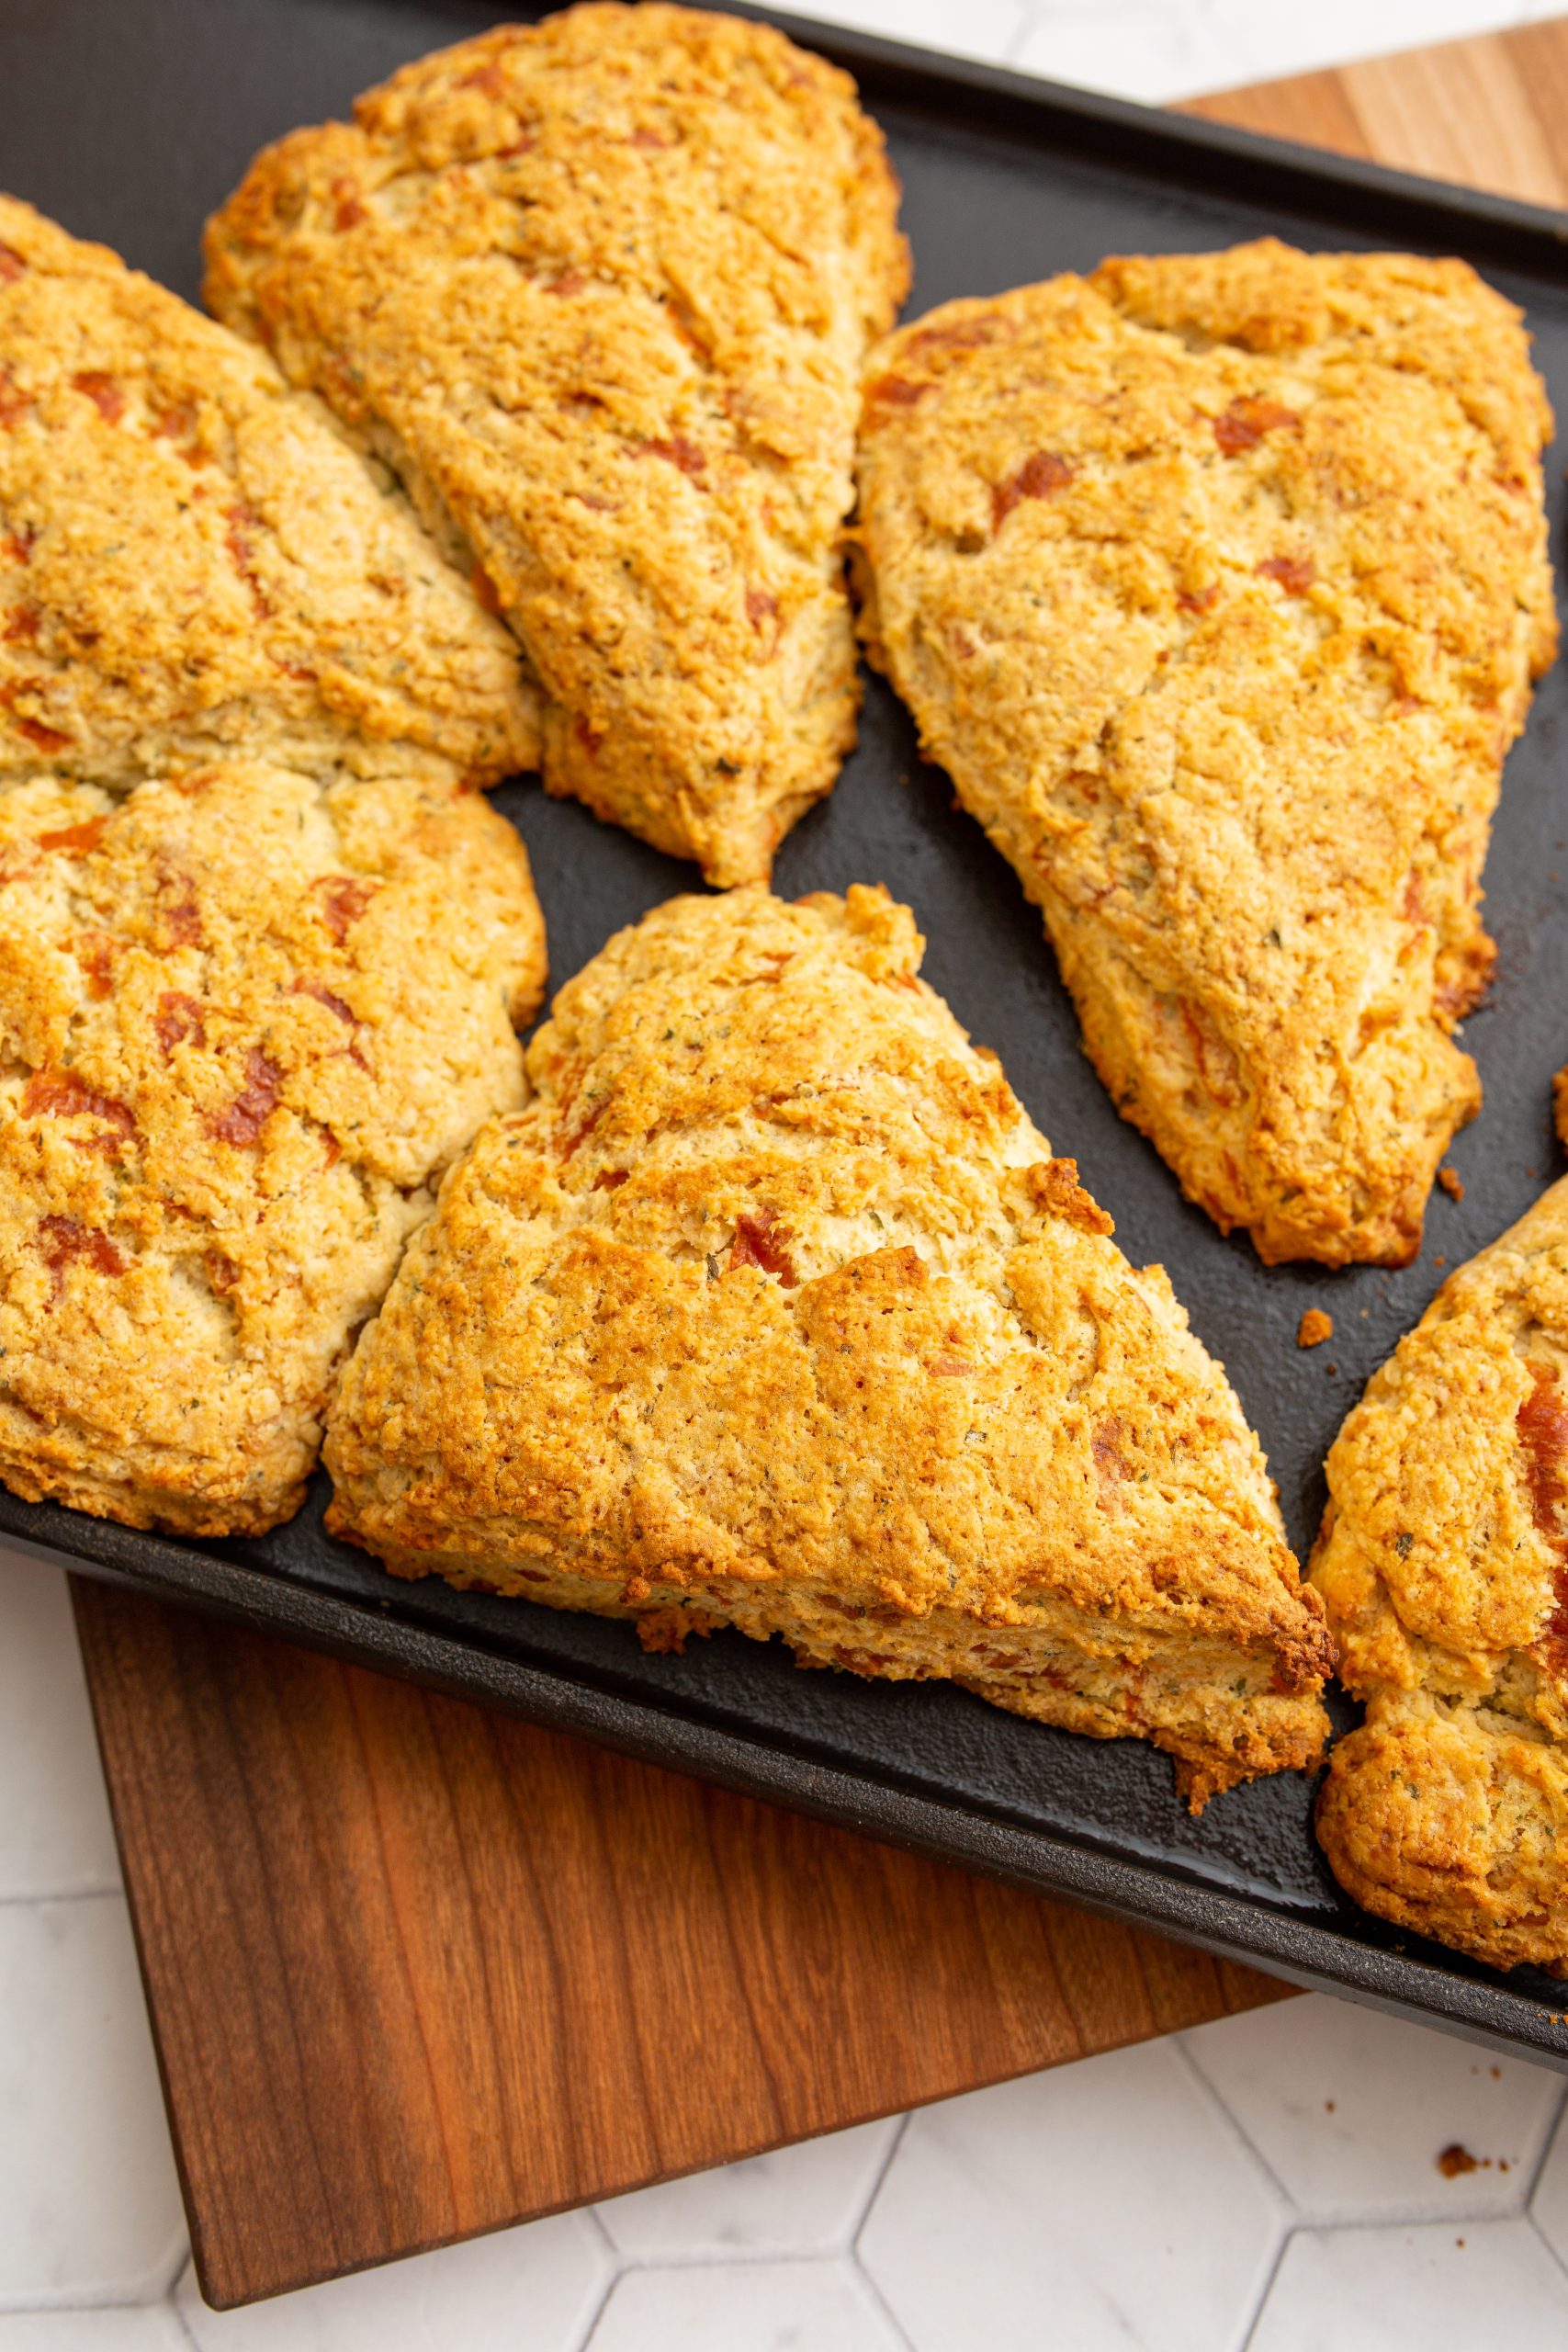 A tray of six golden-brown Cheddar Herb Scones, arranged in neat, spaced intervals on a black baking sheet, rests on a wooden cutting board.